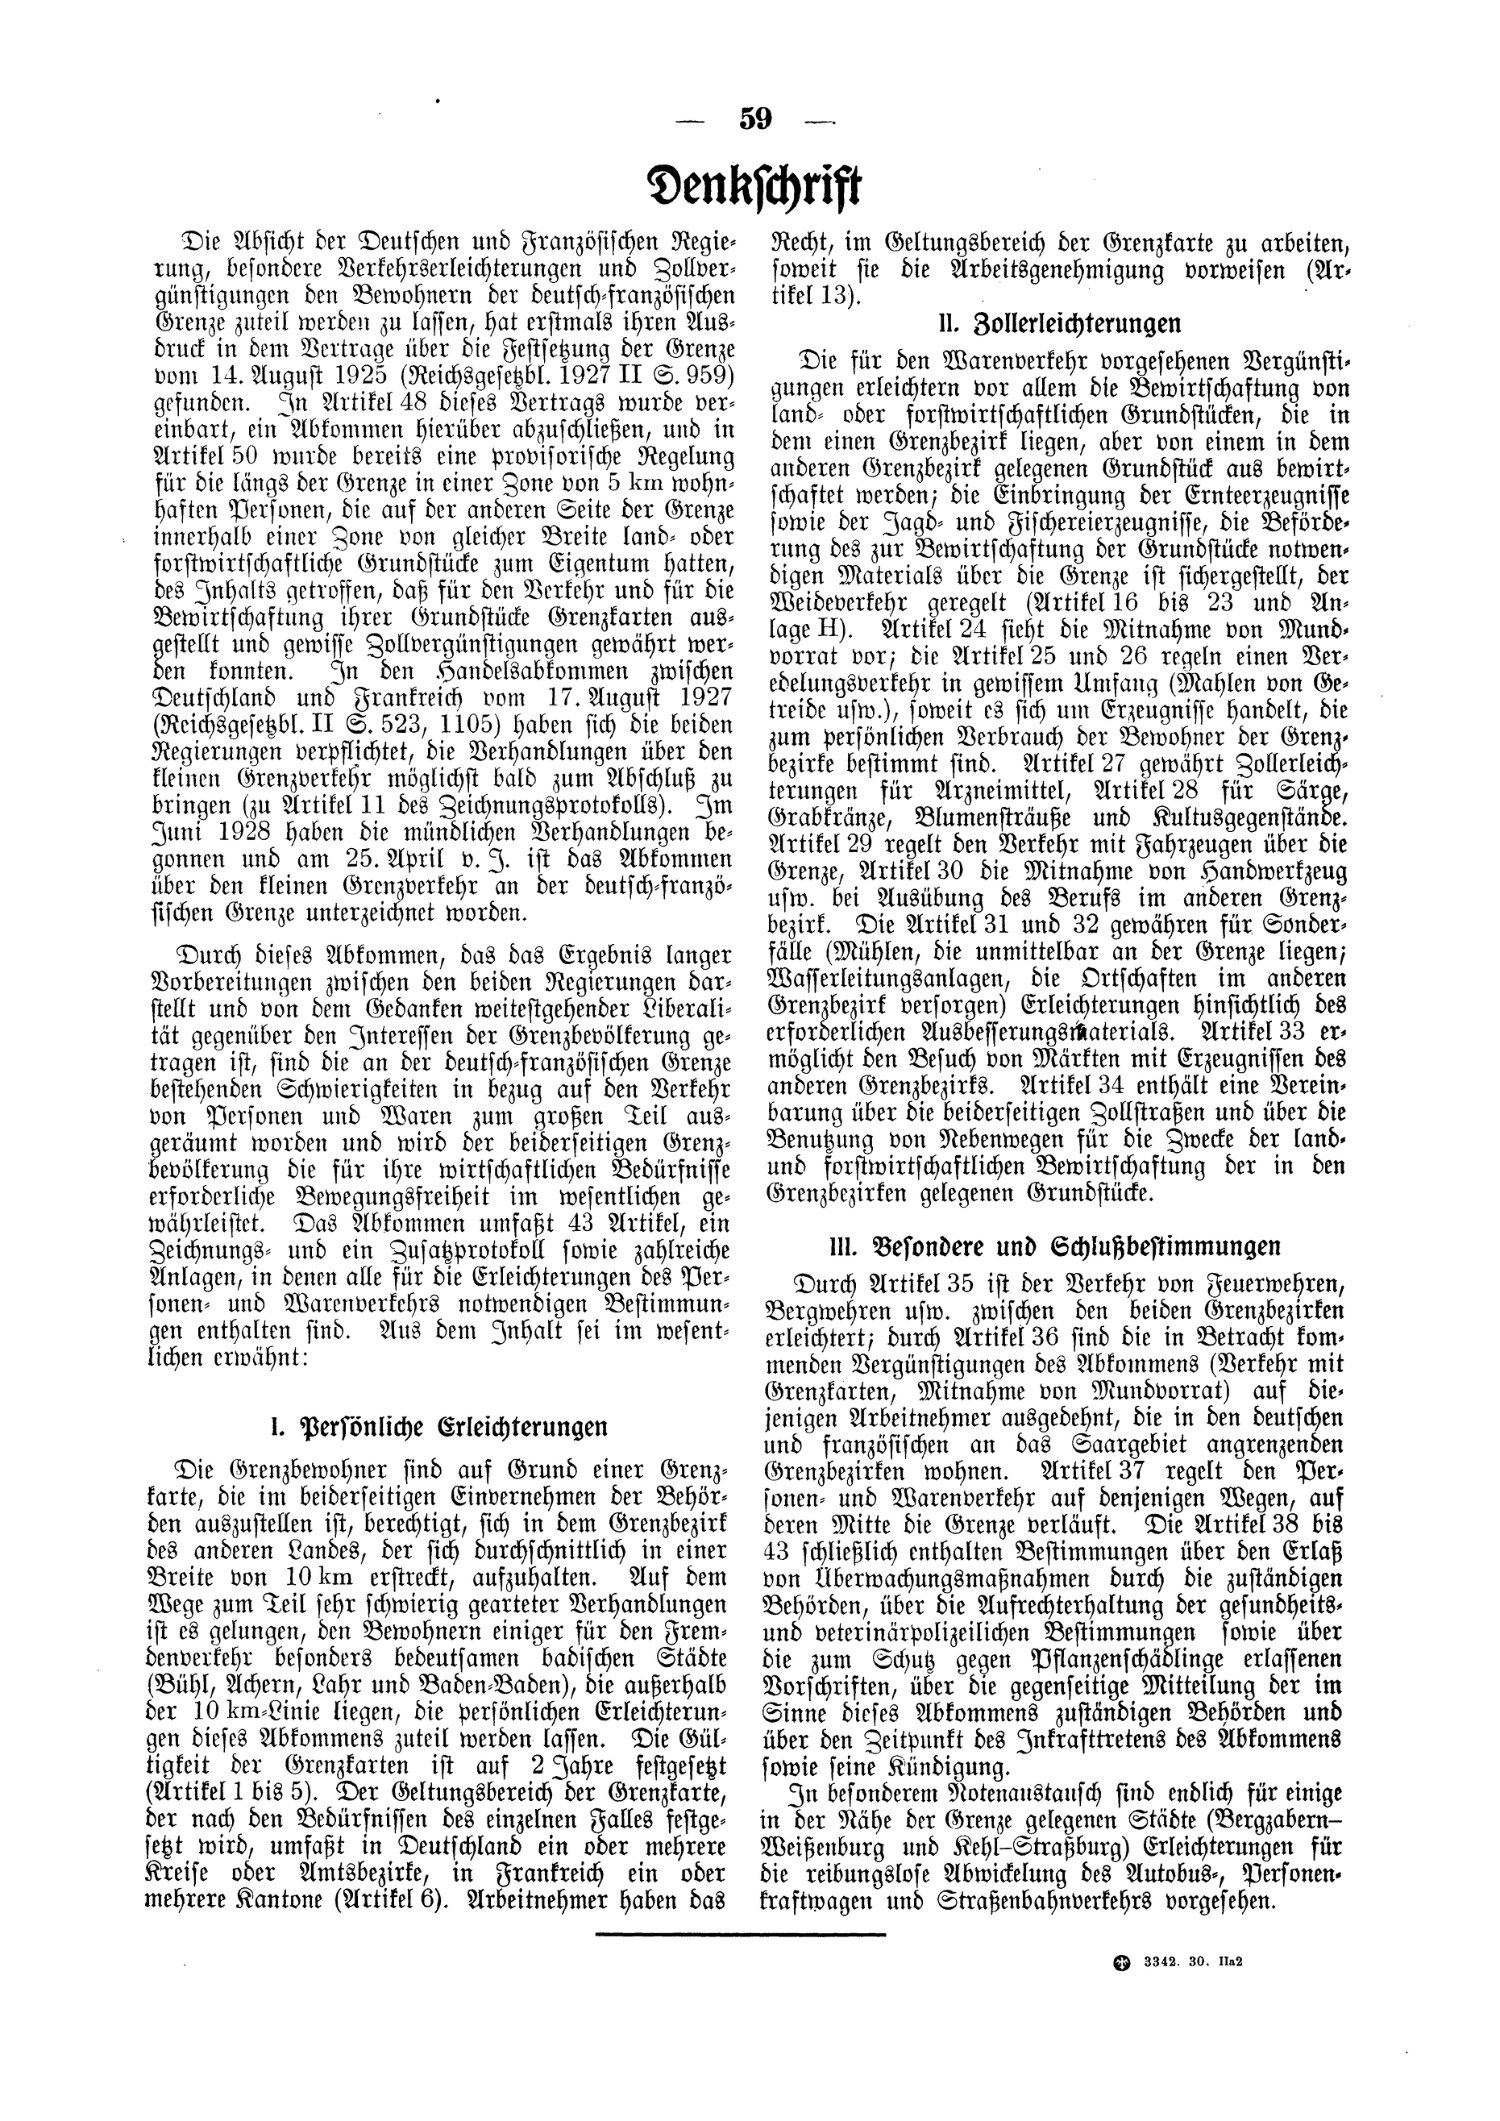 Scan of page 59